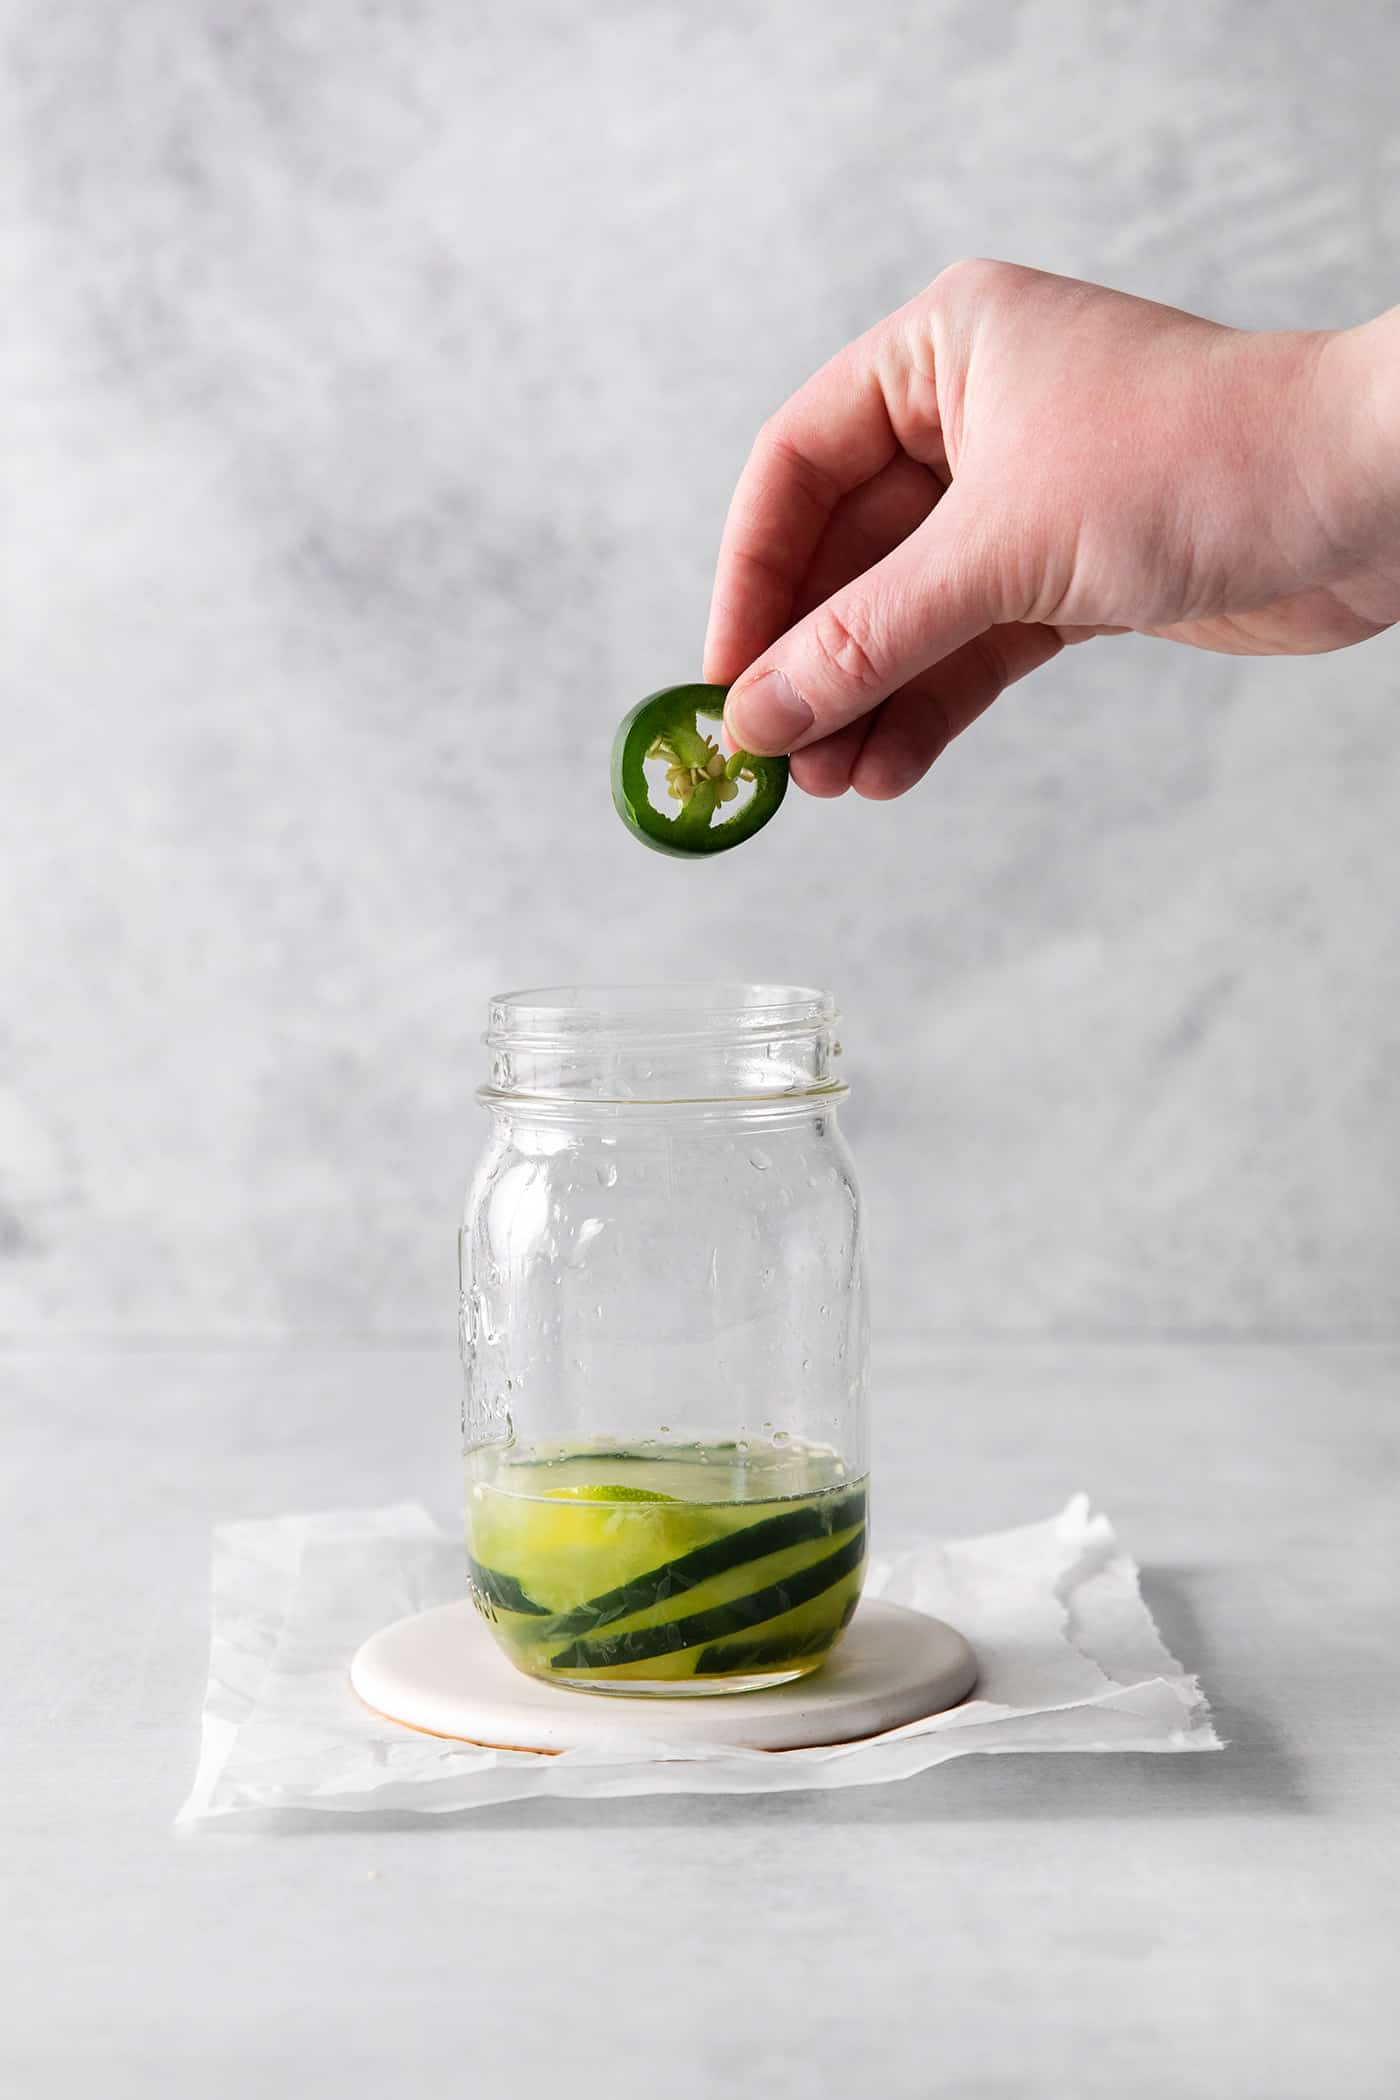 A jalapeno being dropped into a glass with cucumber slices